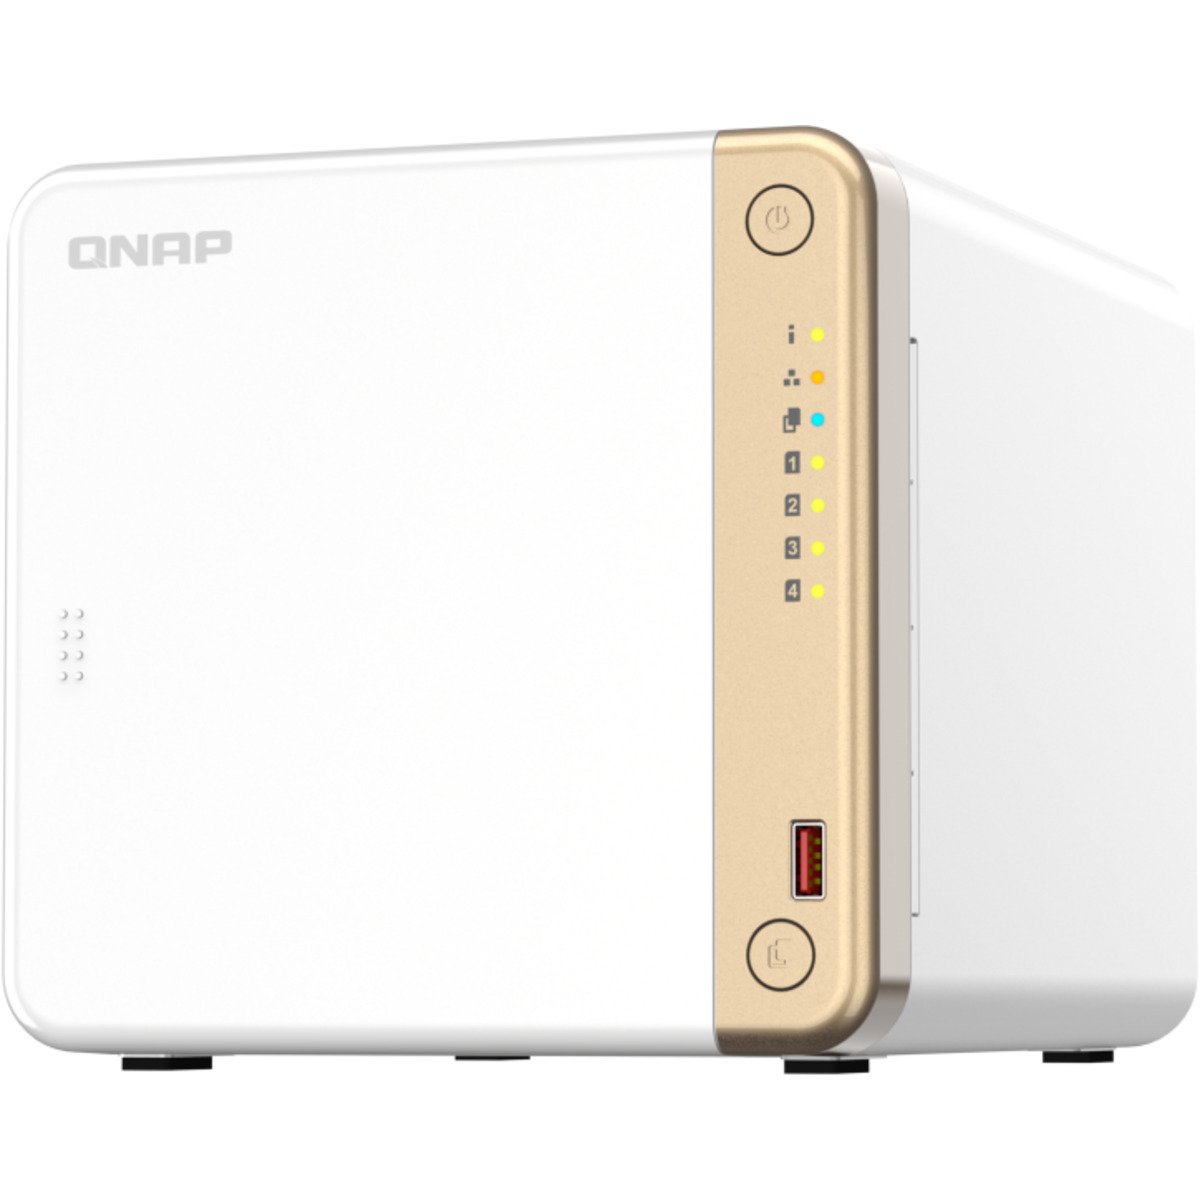 QNAP TS-462 16tb 4-Bay Desktop Multimedia / Power User / Business NAS - Network Attached Storage Device 4x4tb Samsung 870 EVO MZ-77E4T0BAM 2.5 560/530MB/s SATA 6Gb/s SSD CONSUMER Class Drives Installed - Burn-In Tested - ON SALE TS-462